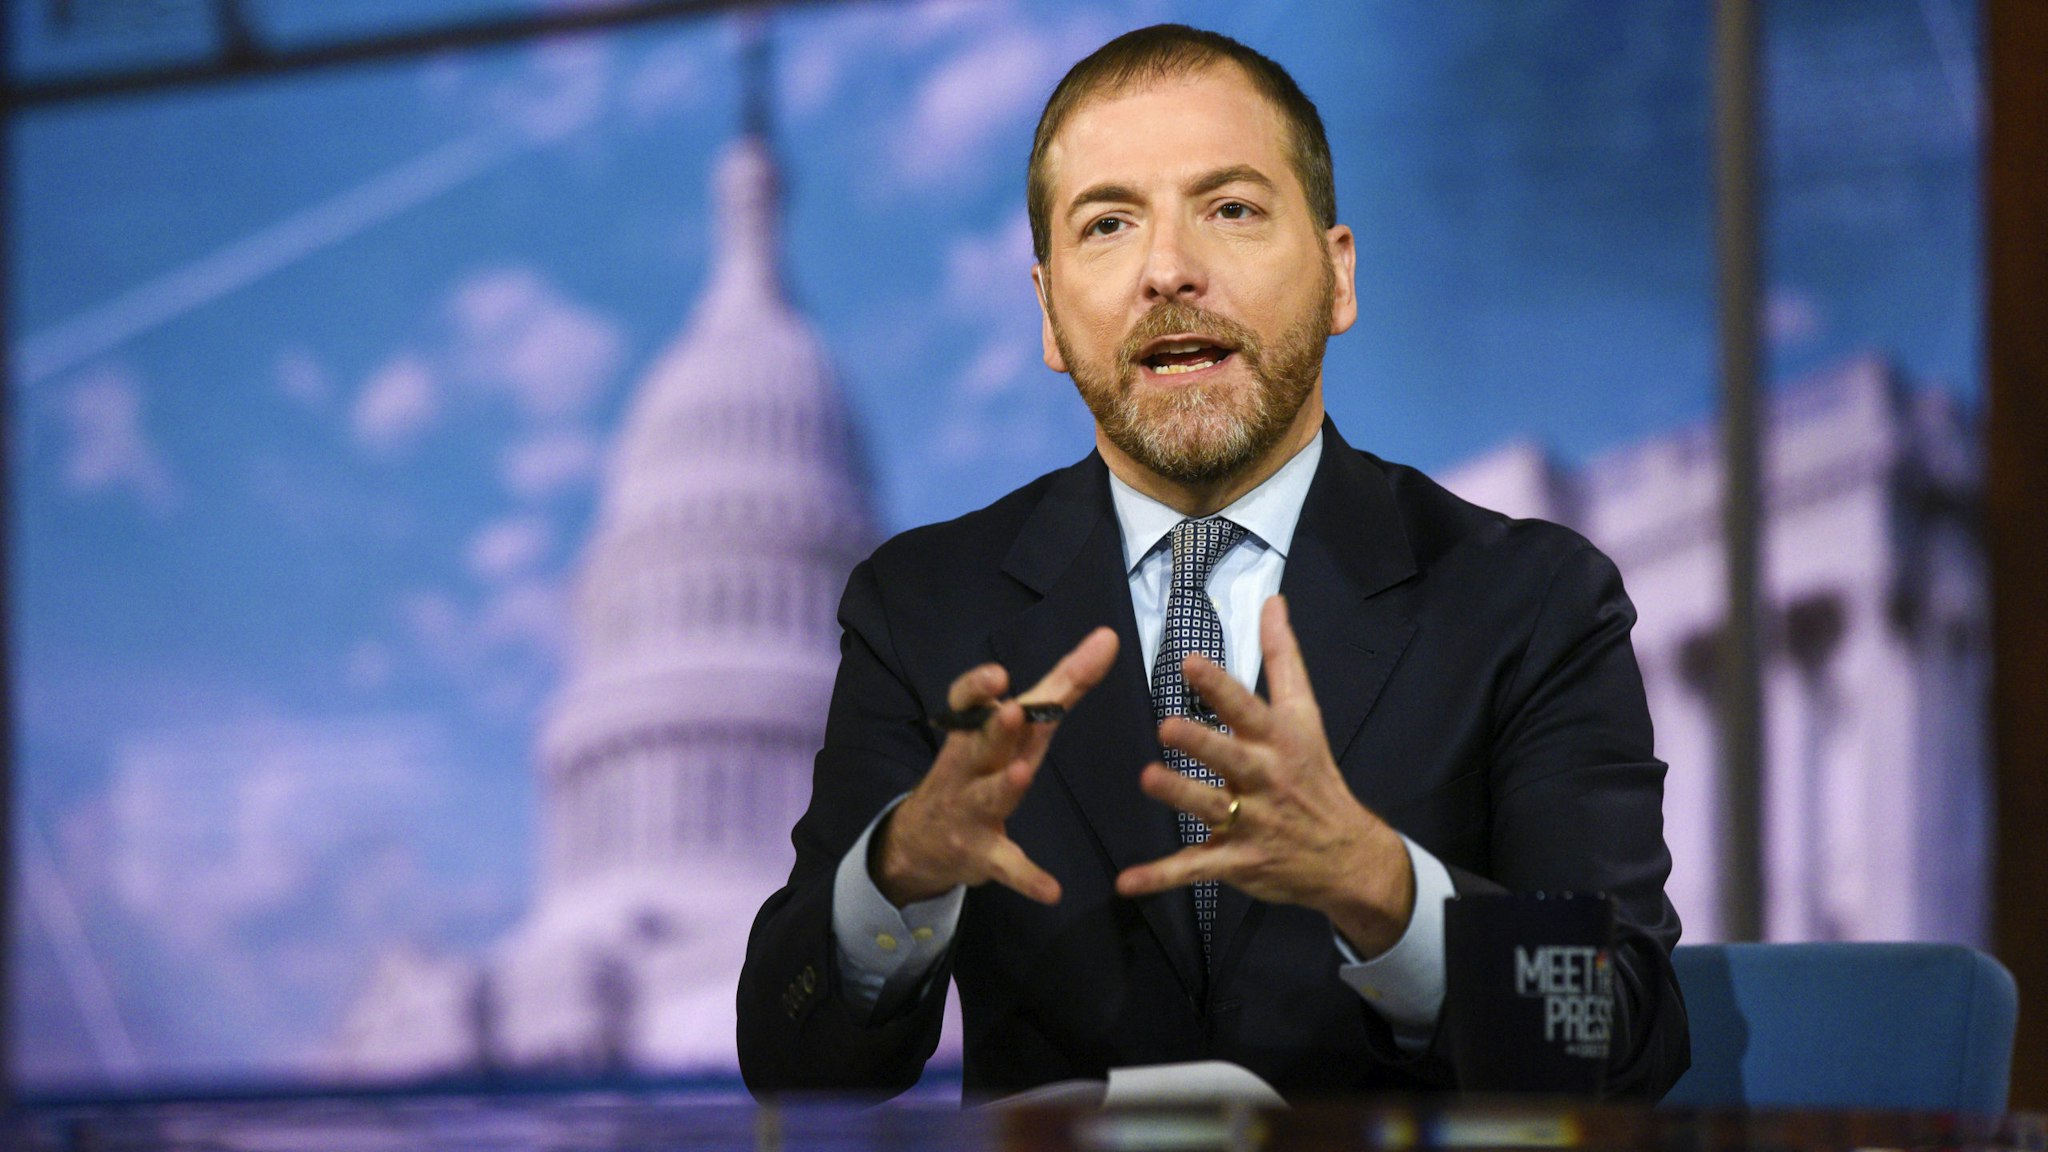 MEET THE PRESS -- Pictured: (l-r) -- Moderator Chuck Todd appears on Meet the Press" in Washington, D.C., Sunday, Feb. 16, 2020.